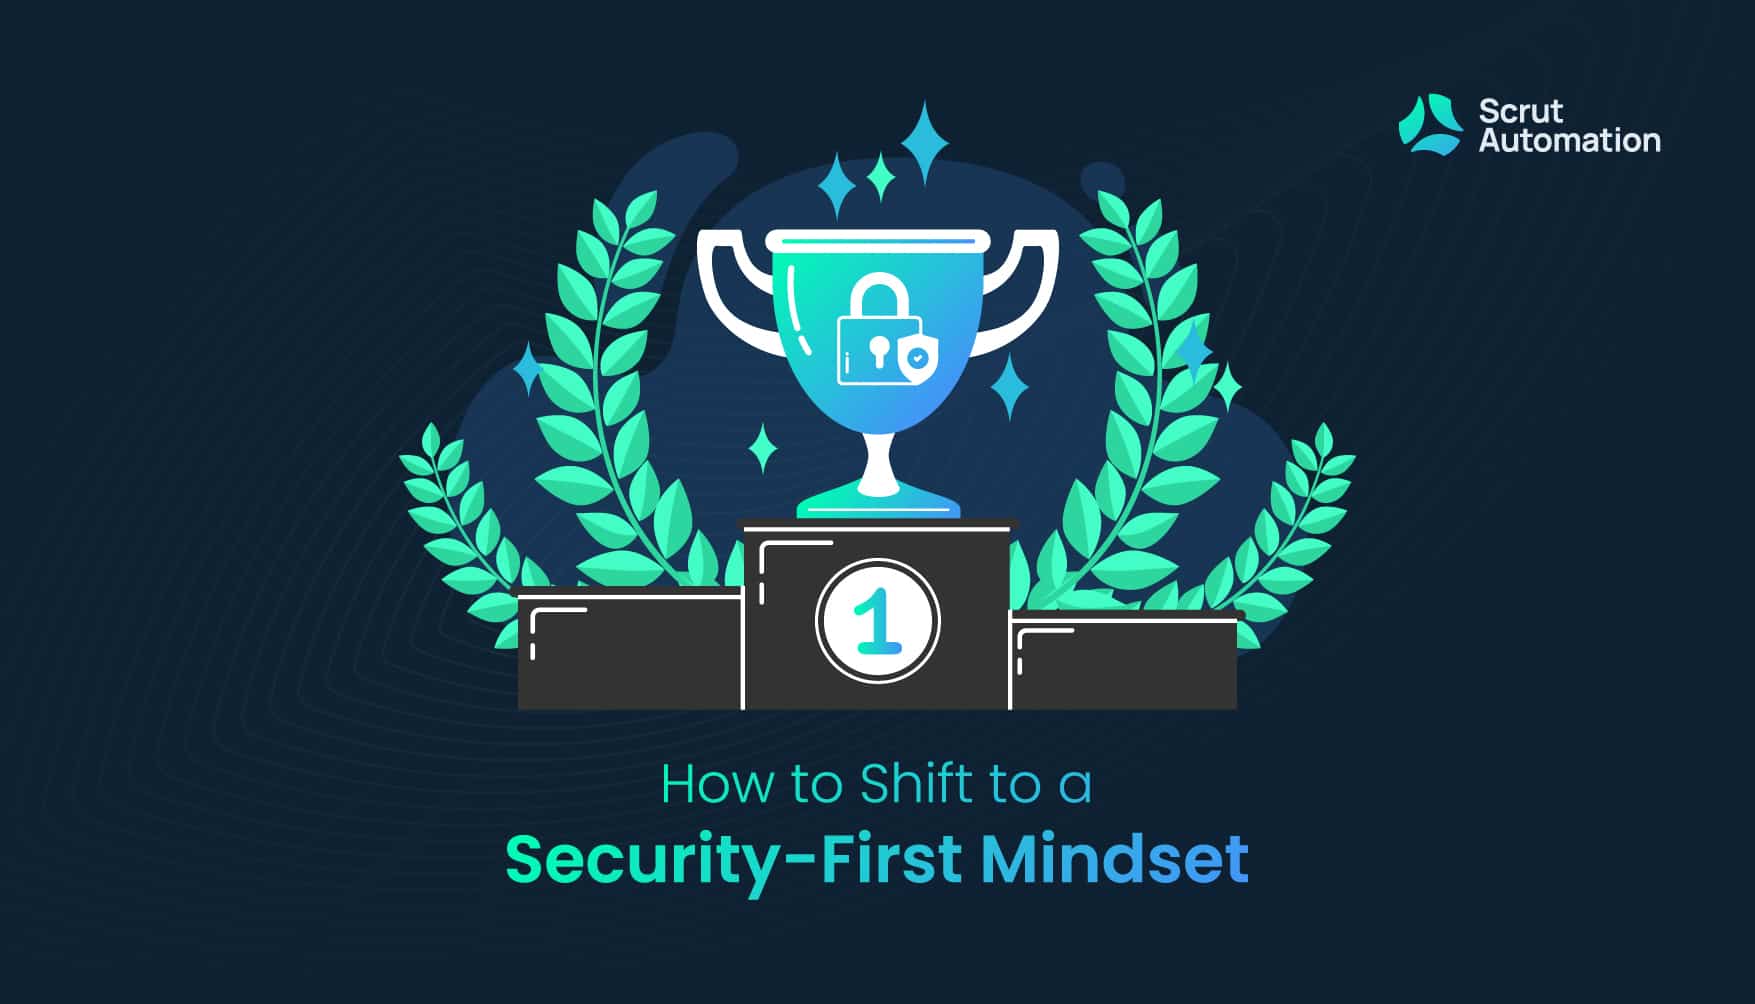 Top 10 Ways To Shift Your Organization to a Security-First Mindset